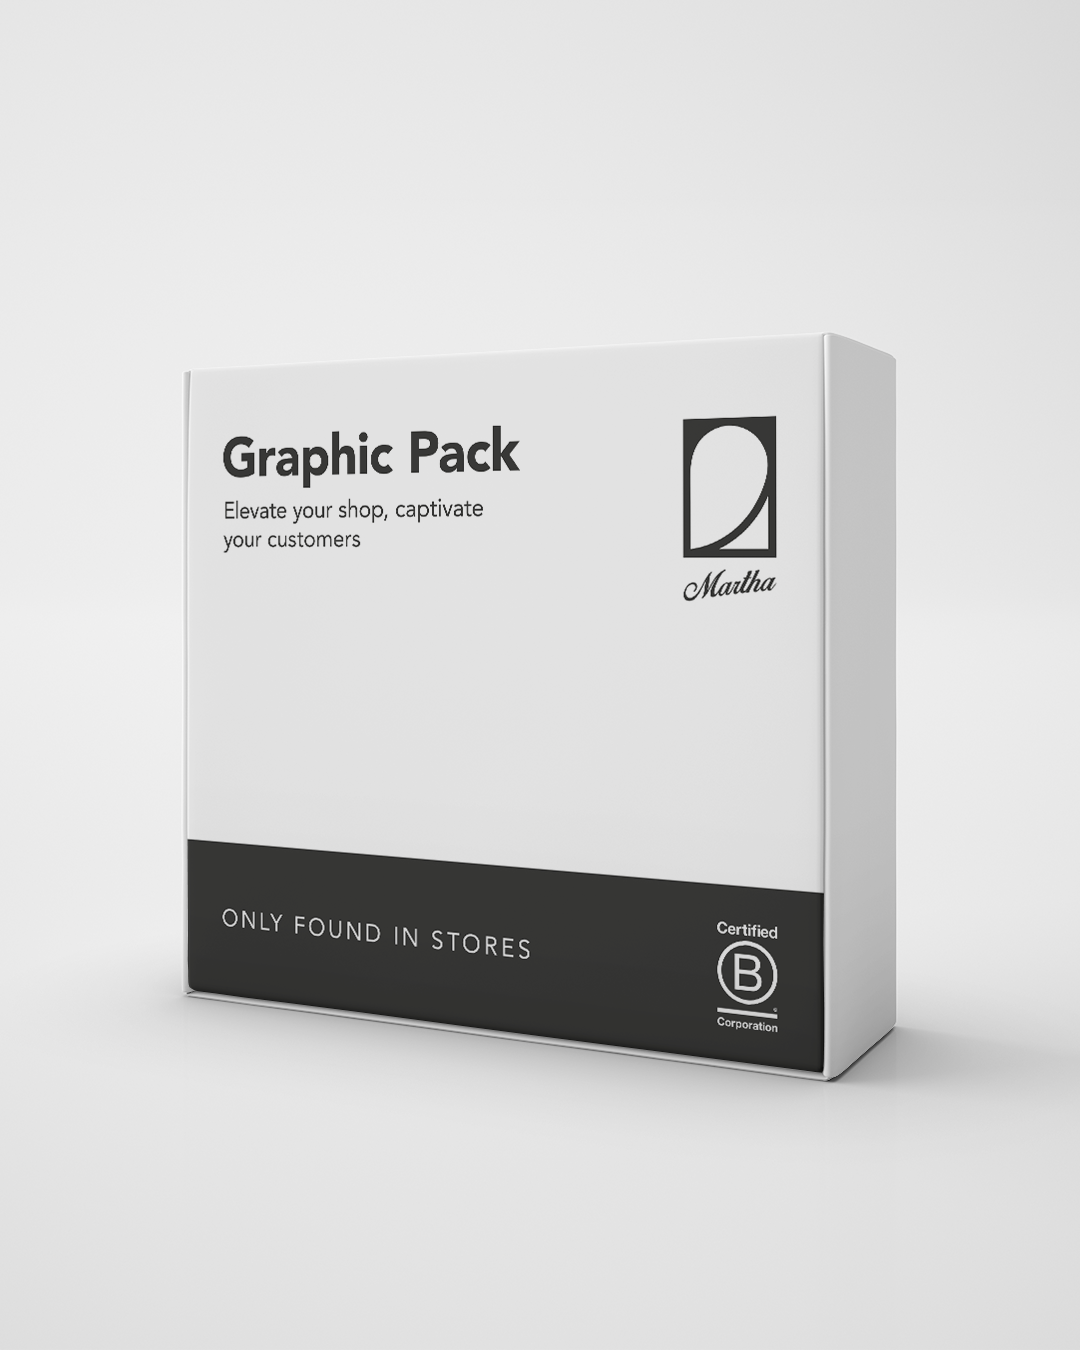 Graphic Pack